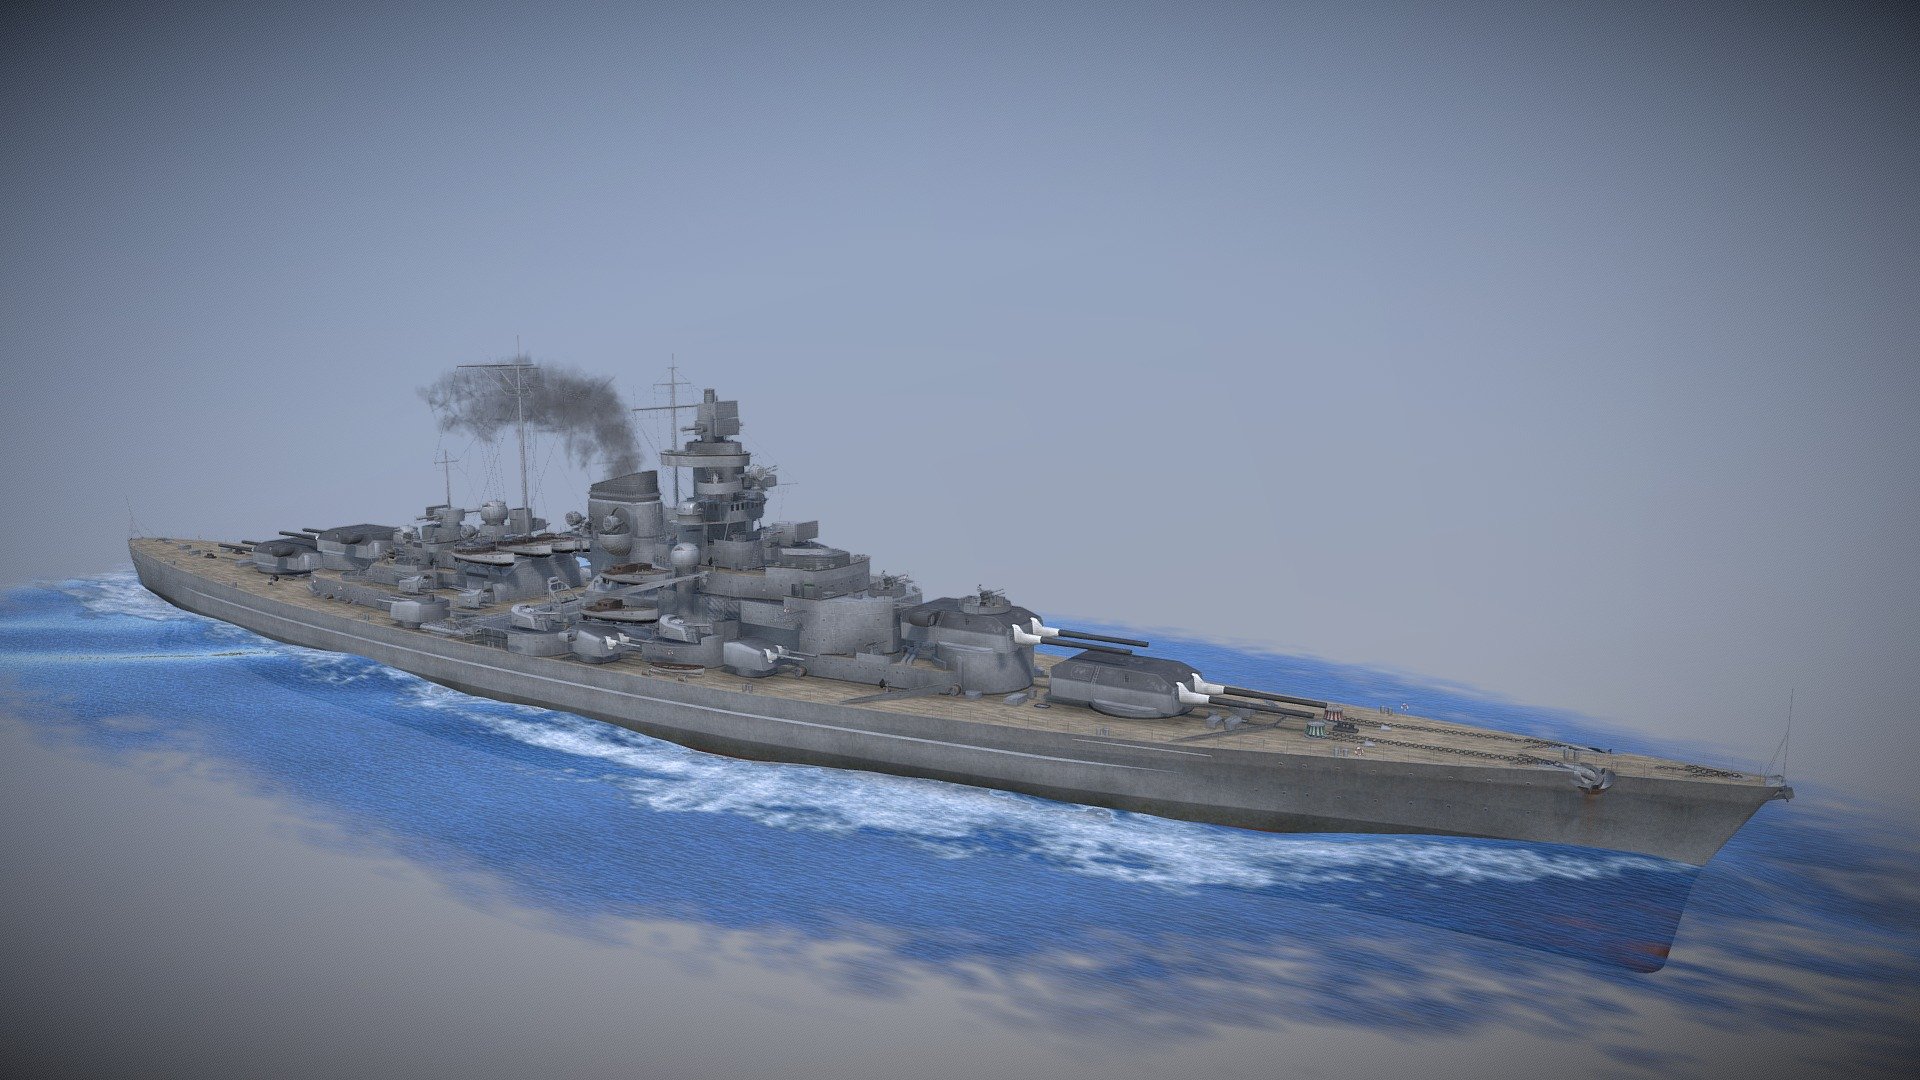 The KMS Tirpitz was a Bismarck-class battleship of the German Kriegsmarine during World War 2. She was sunk by Royal Air Force bombers in 1944 after numerous air raids over the years.

Additional renders can be viewed here: www.artstation.com/artwork/bKY3wo - Tirpitz - Buy Royalty Free 3D model by ThomasBeerens 3d model